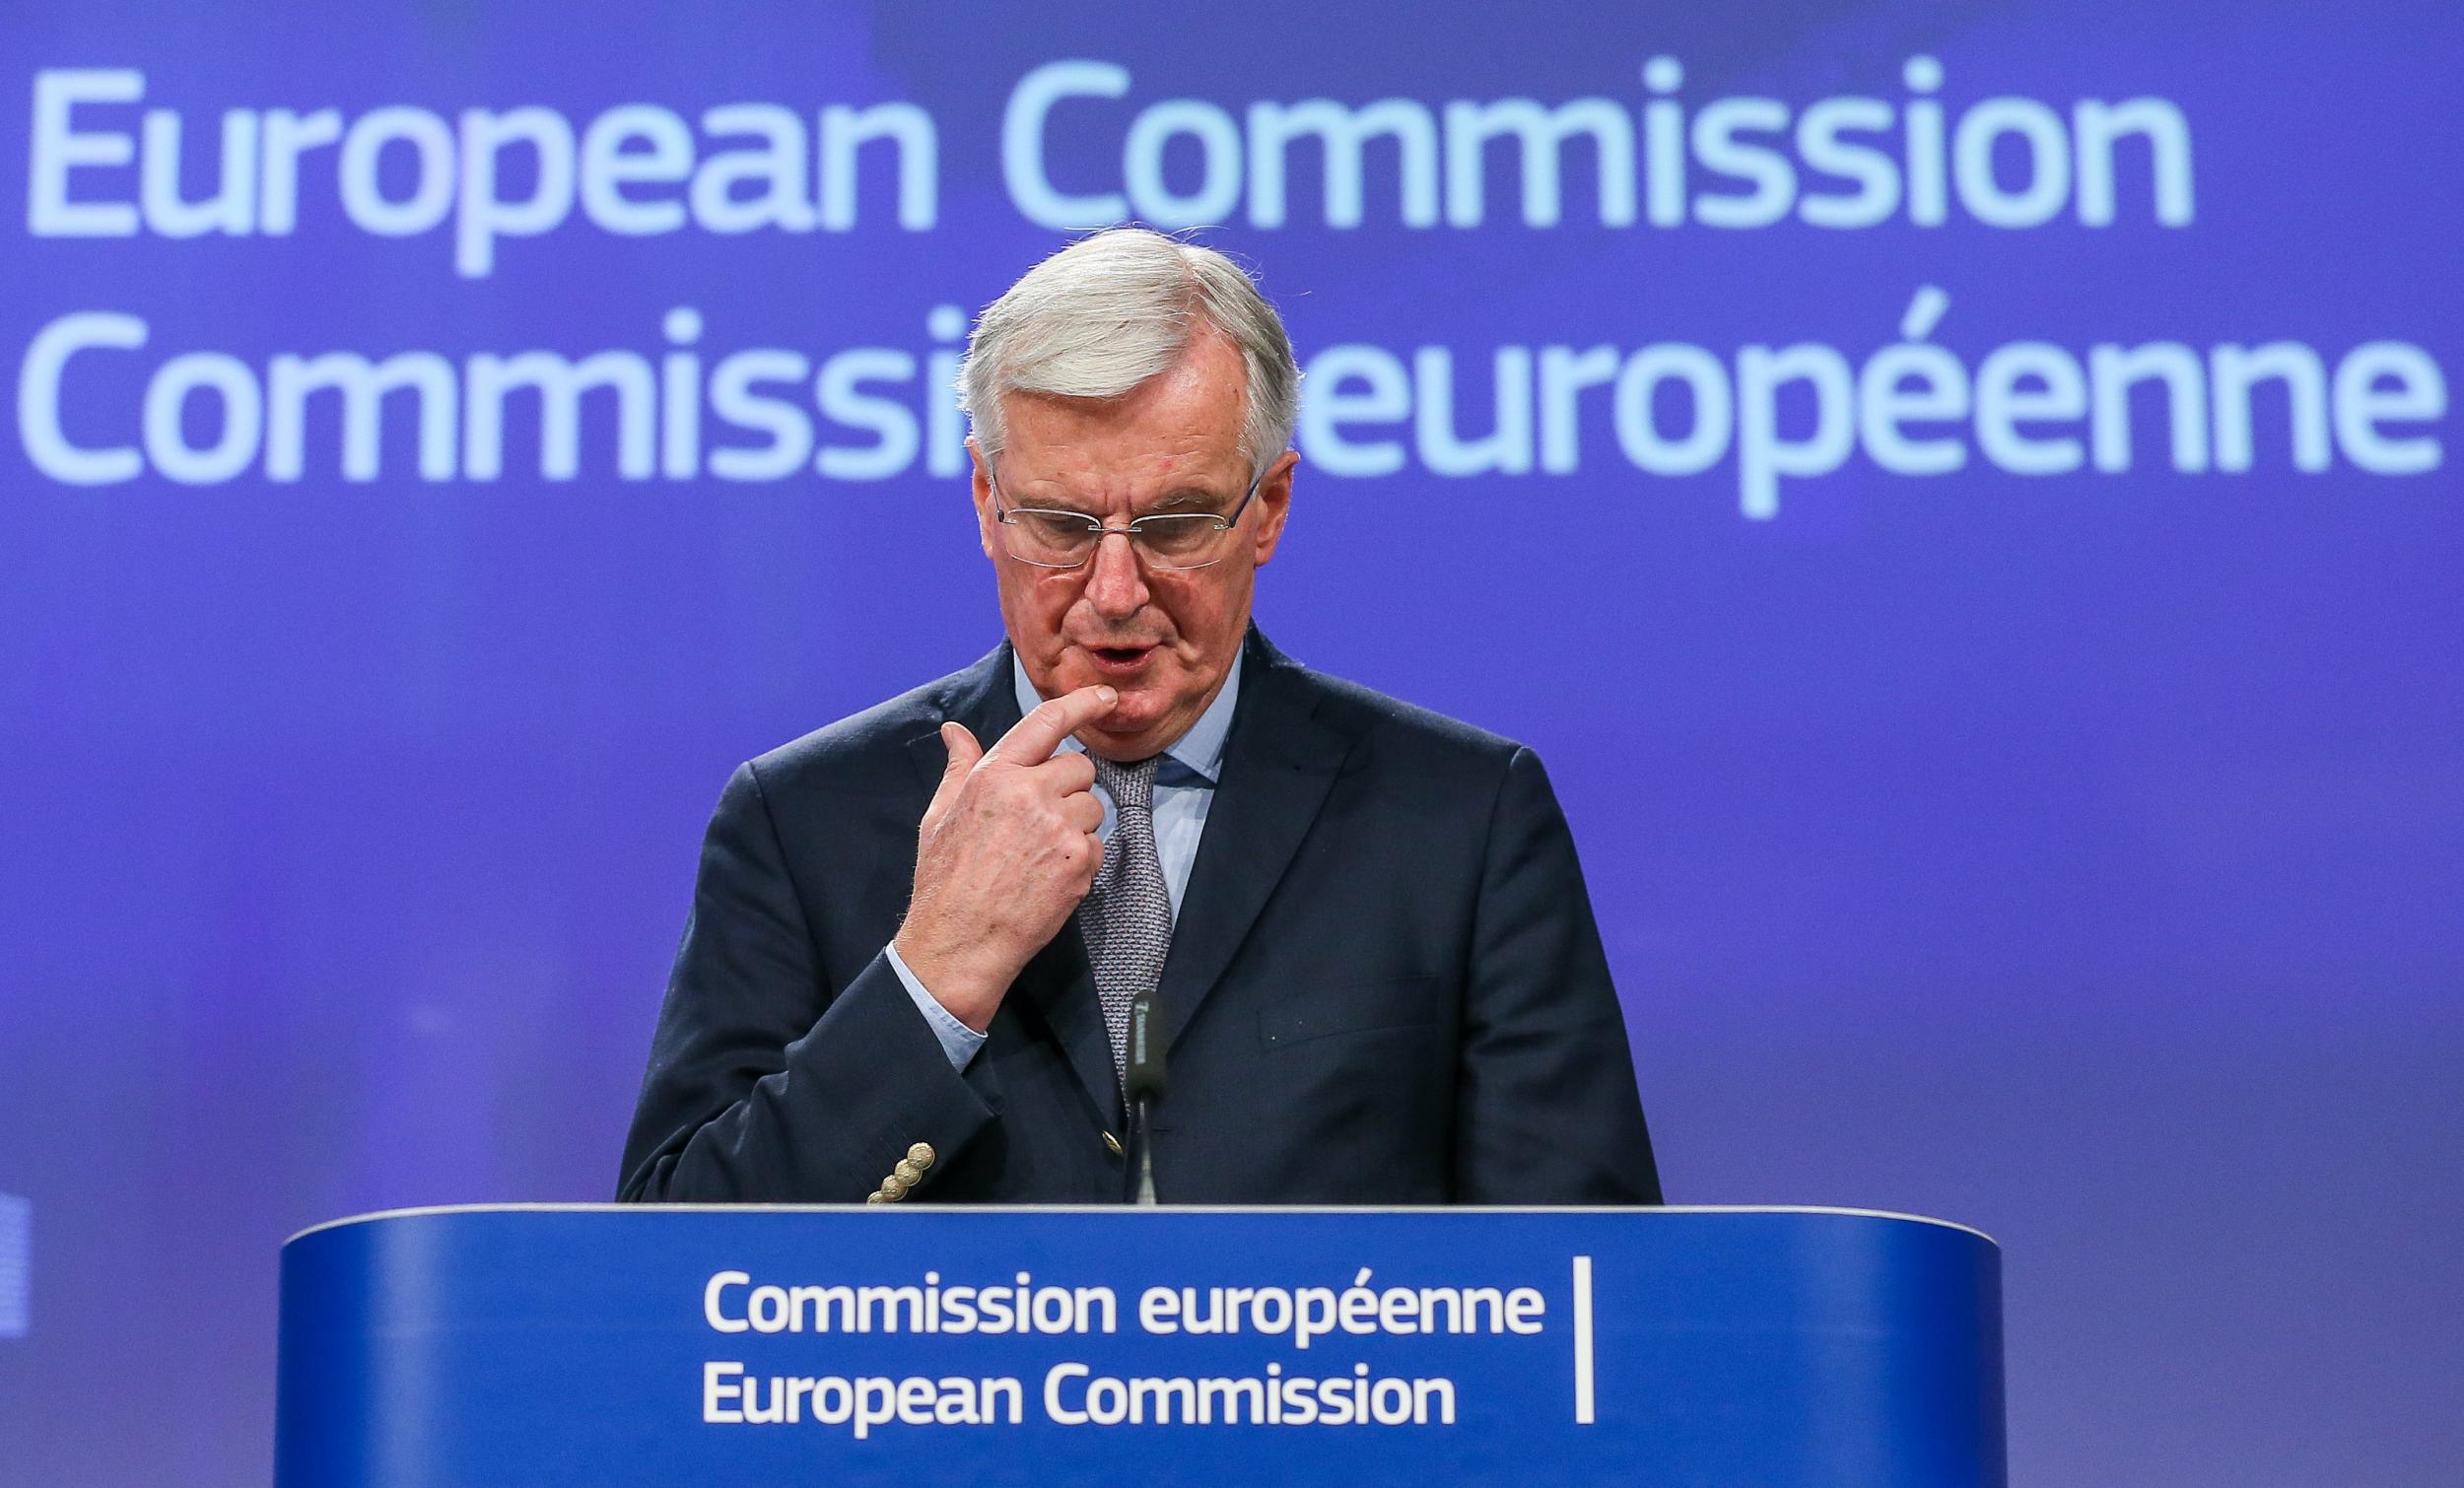 Michel Barnier, Europe's Chief Brexit negotiator, gives a press conference on the status of the negotiations